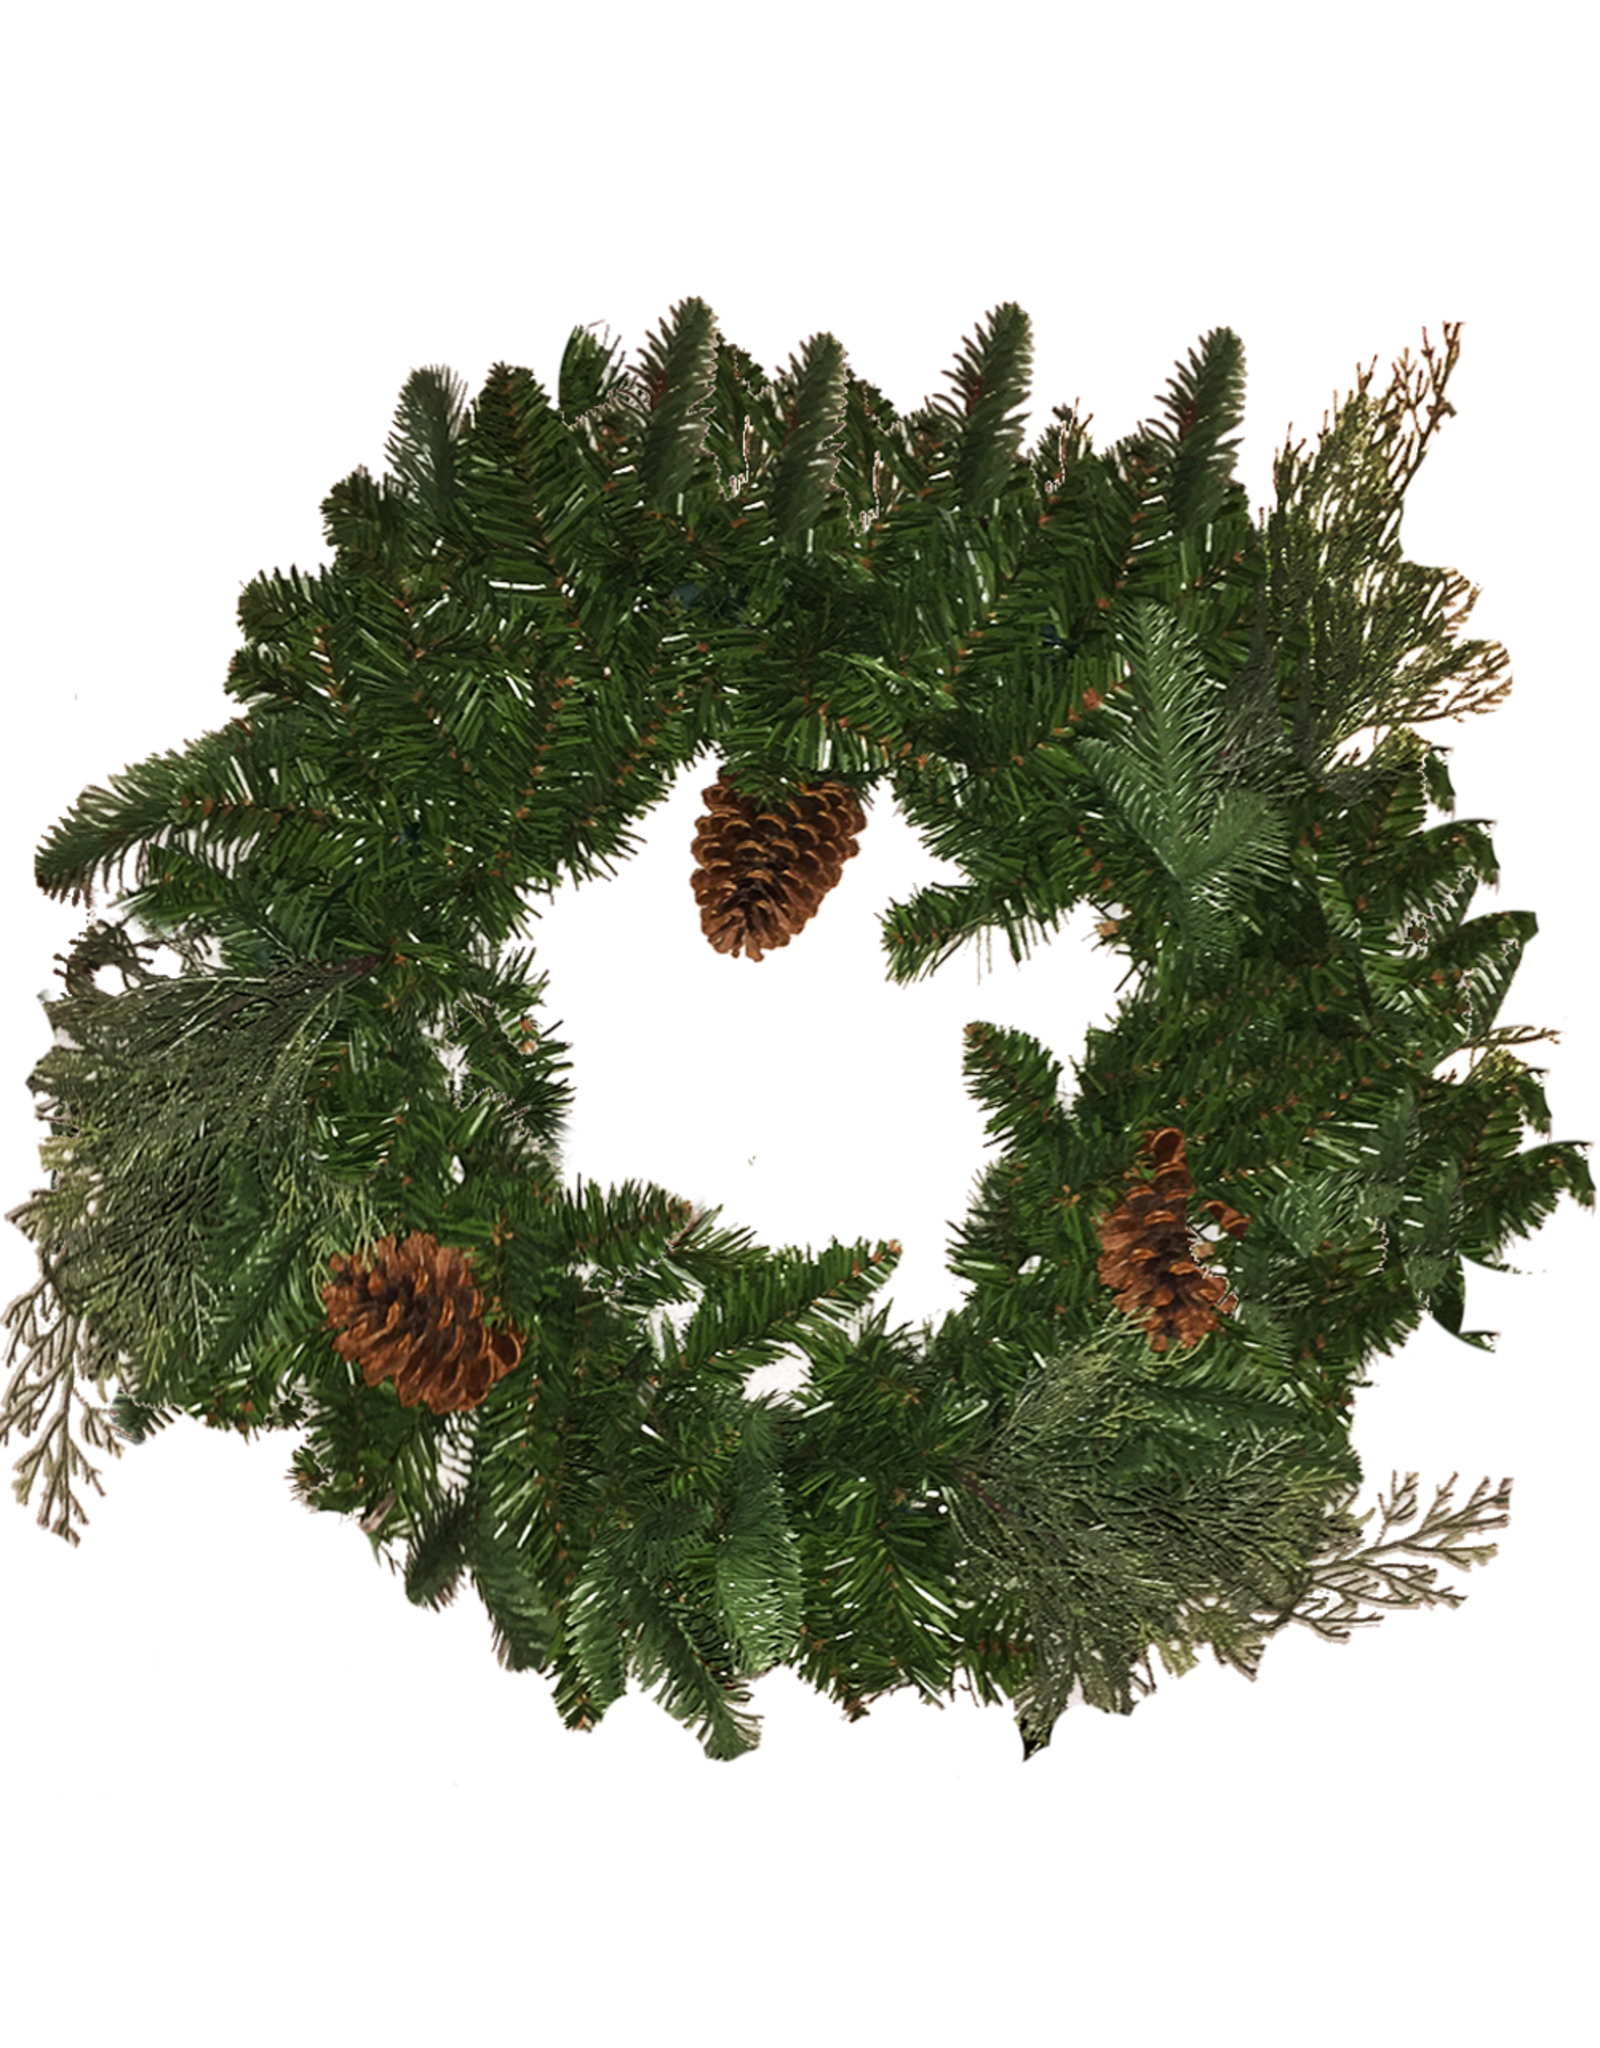 Darice Christmas Wreath 24 inch Pre-Lit 35 LED Light-Battery Operated w Timer